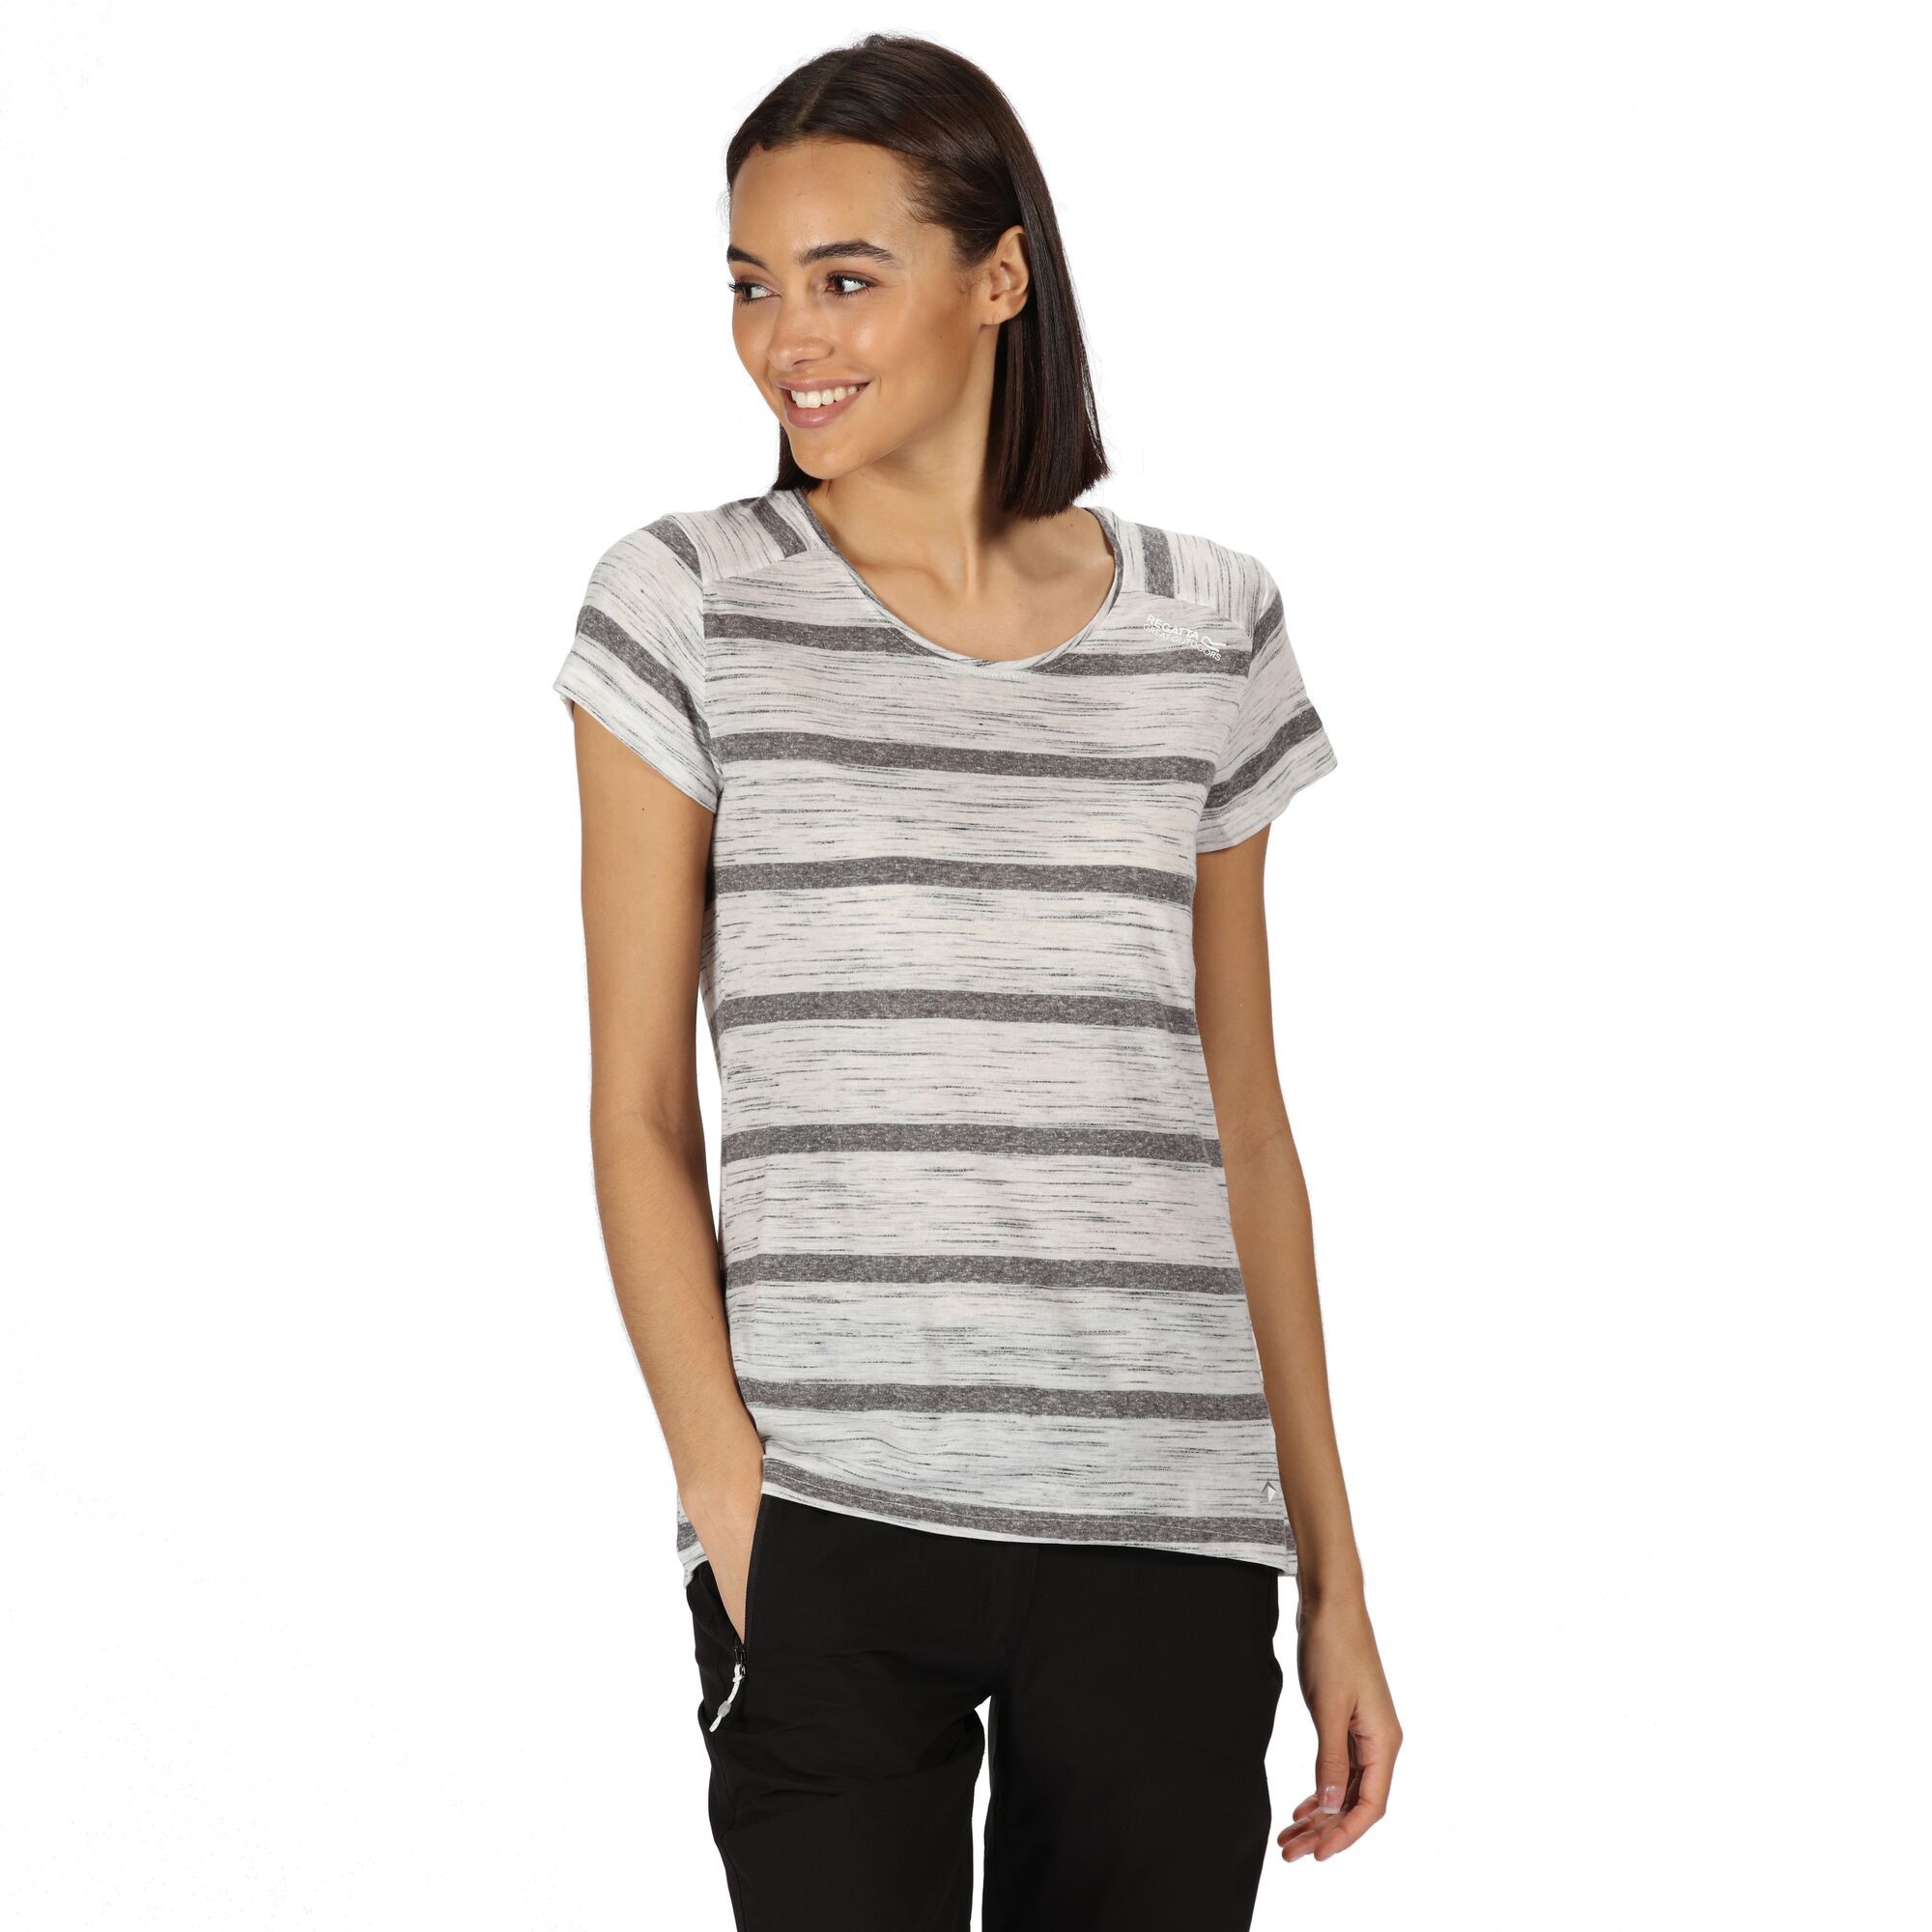 Material: 90% polyester, 7% cotton, 3% viscose/rayon. Good wicking performance. Semi-sheer stripes. Cap sleeves.